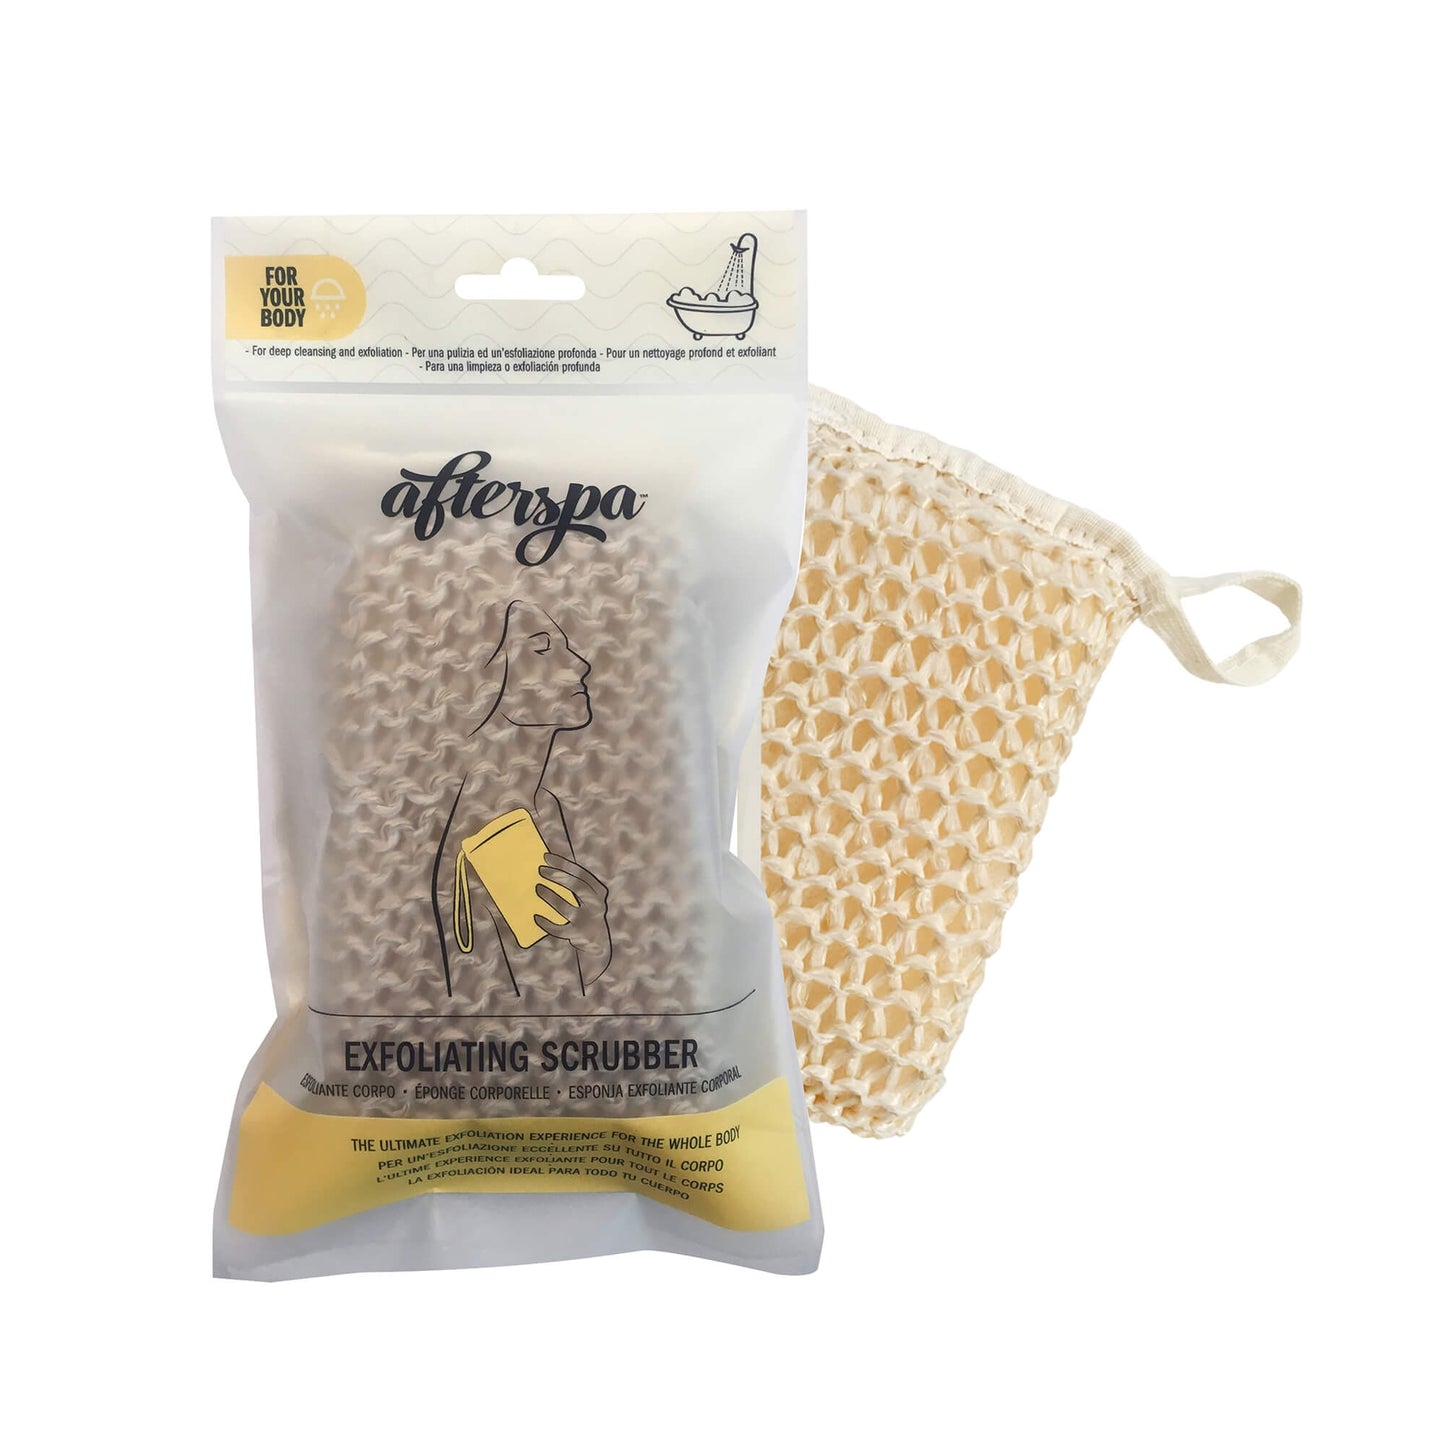 Bath and Shower Exfoliating Scrubber -Afterspa- Spa experience at home